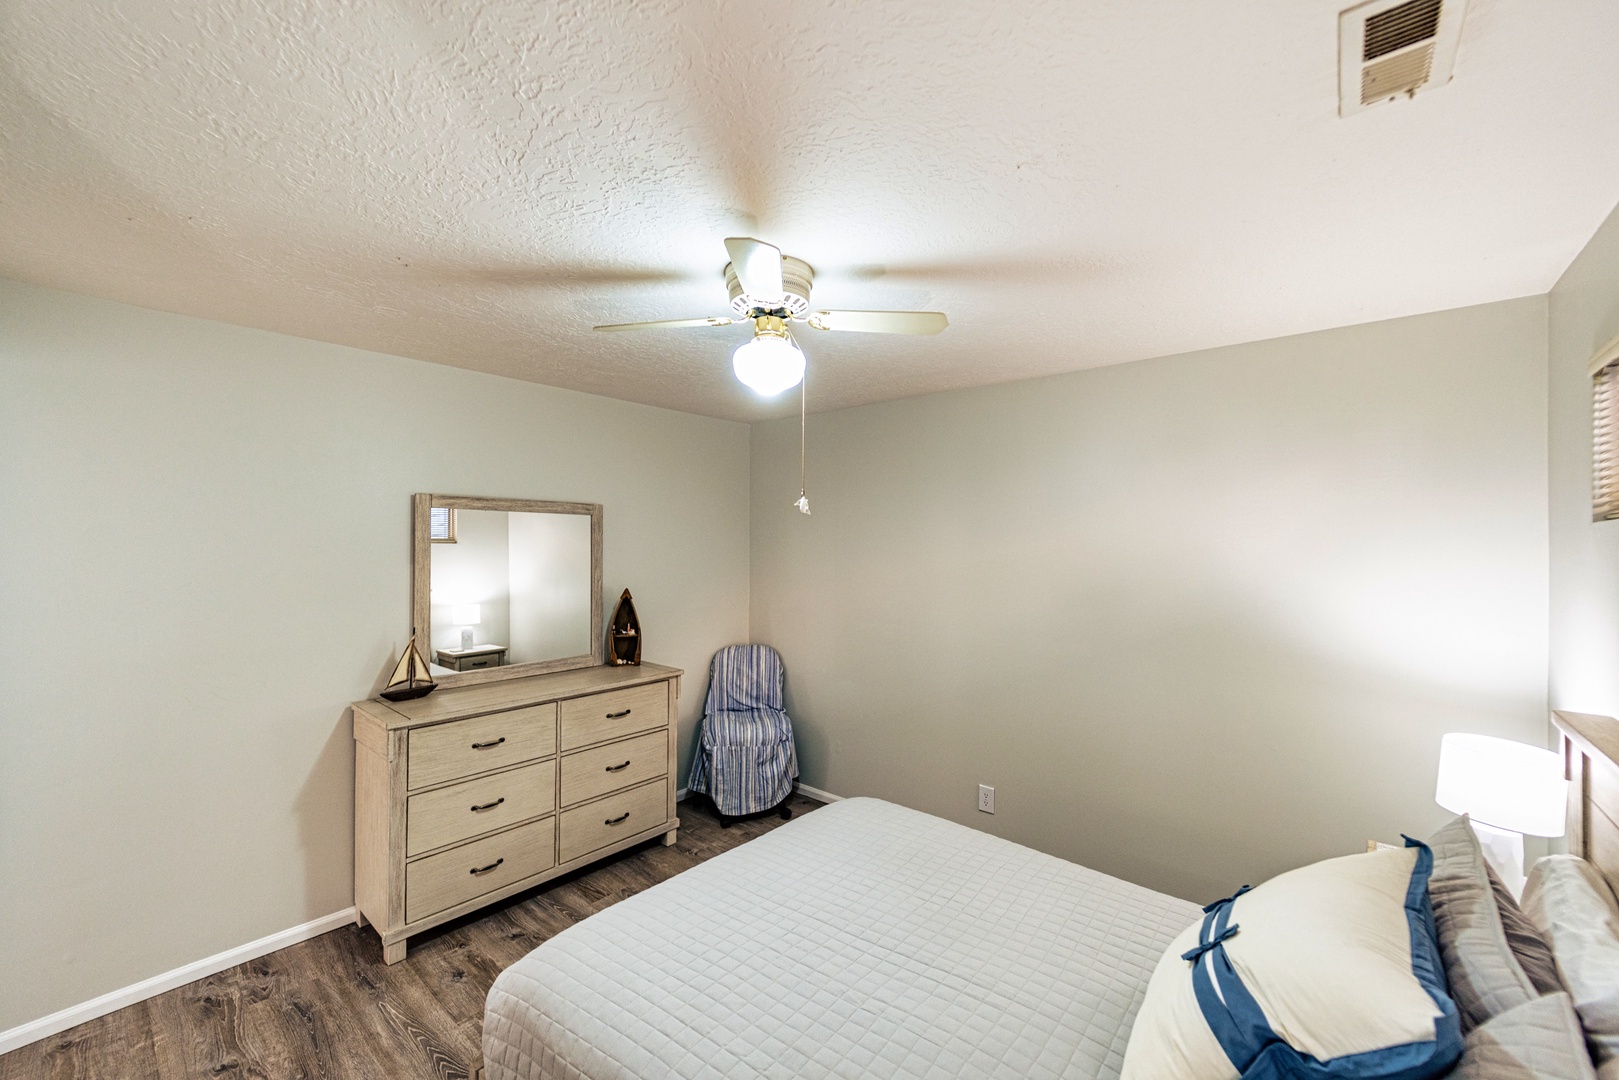 Relax in the peaceful second bedroom with a comfortable queen bed